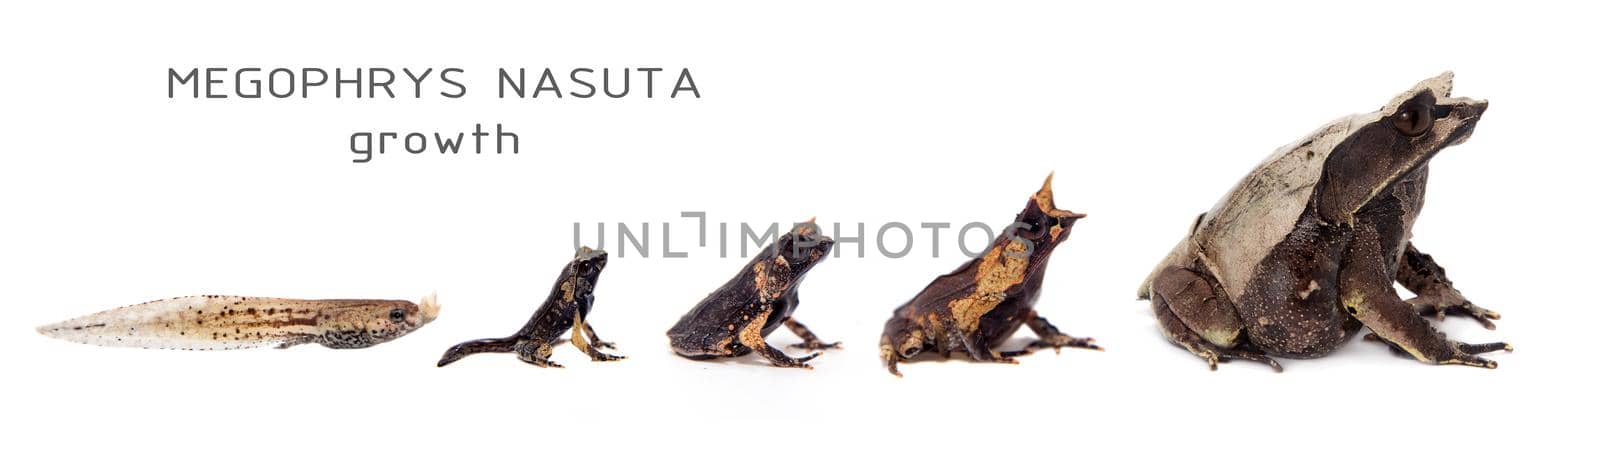 The long-nosed horned frog, Megophrys nasuta, growth isolated on white background